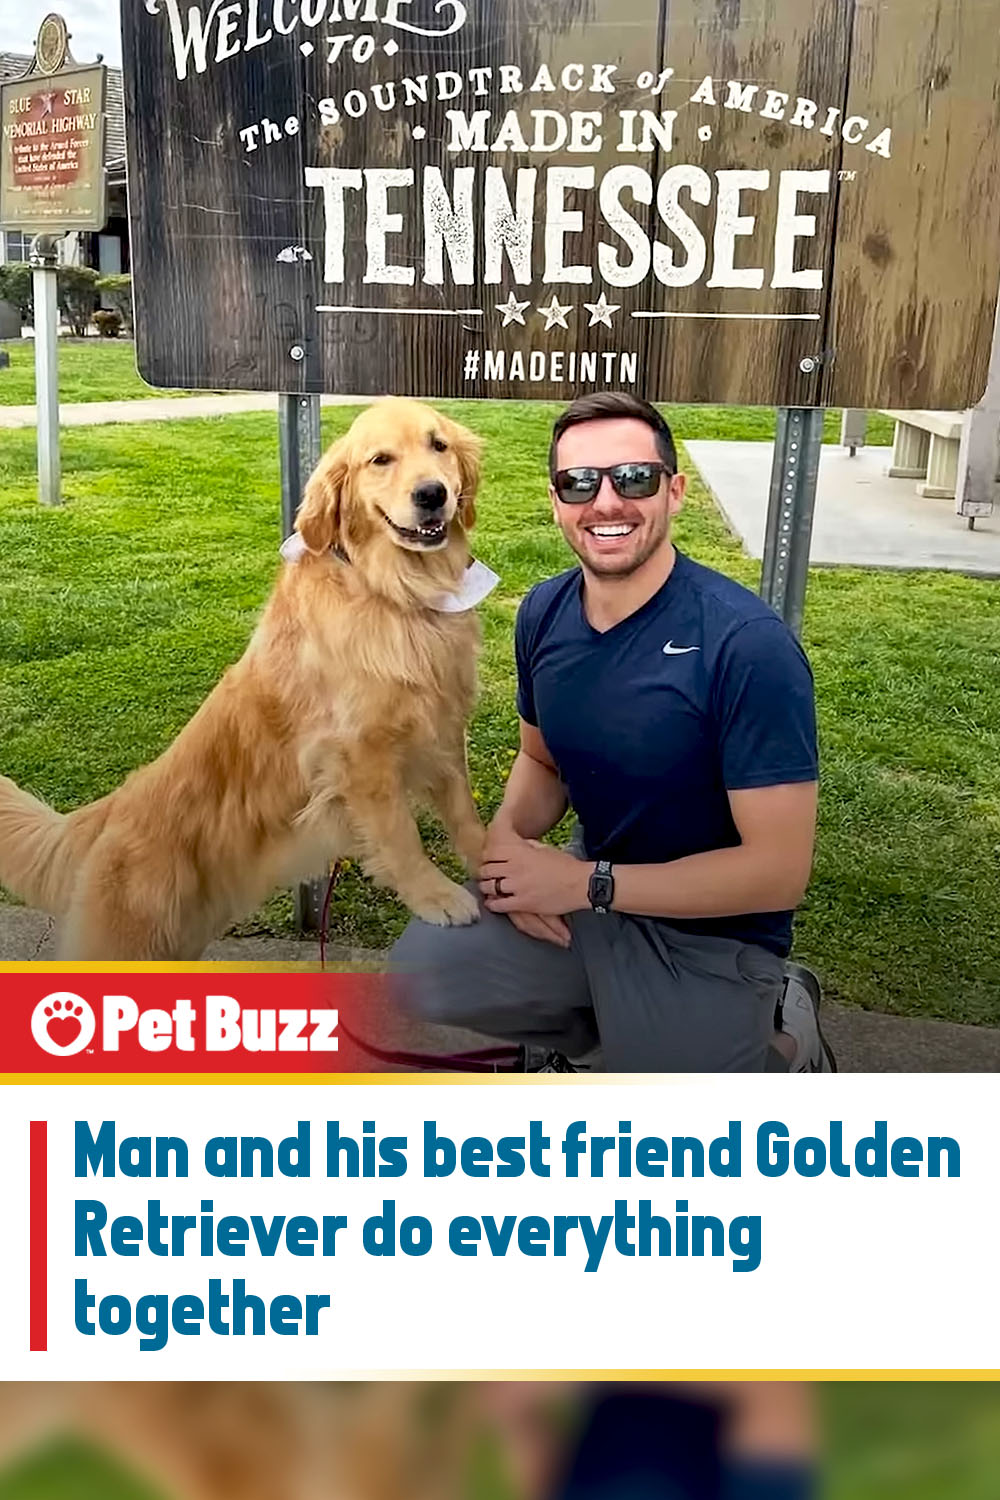 Man and his best friend Golden Retriever do everything together